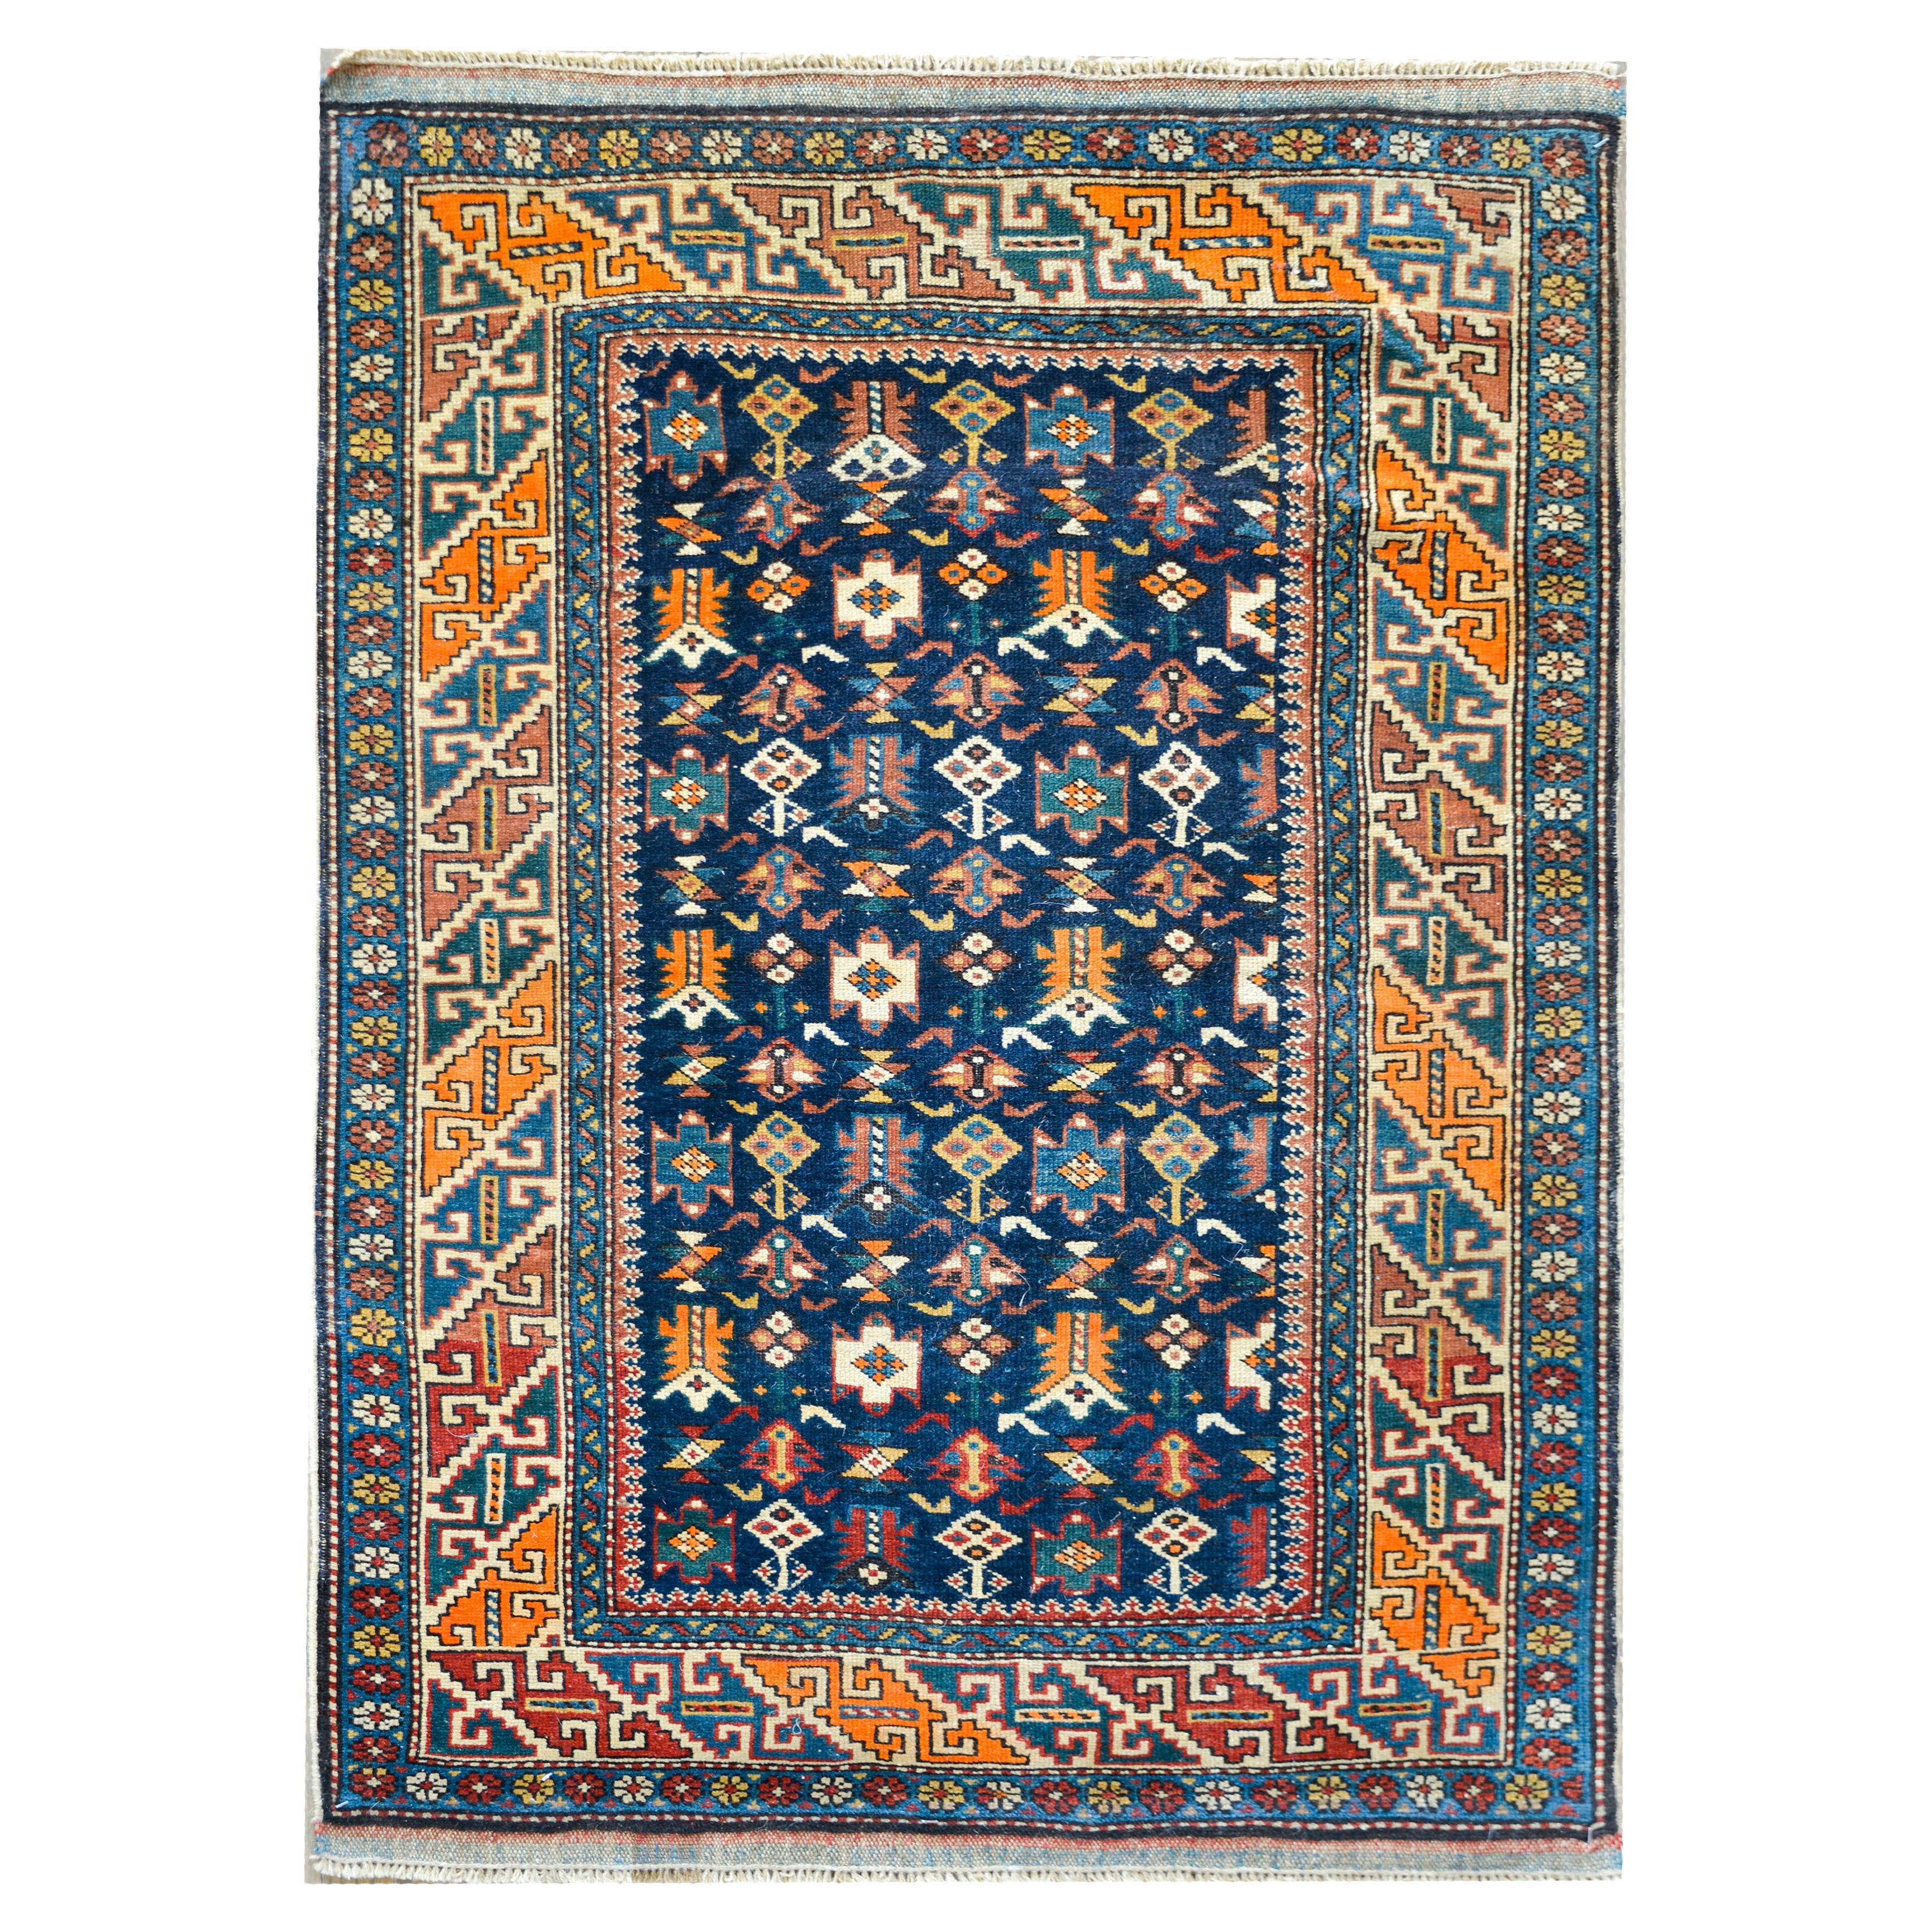 Early 20th Century Perepedil Rug